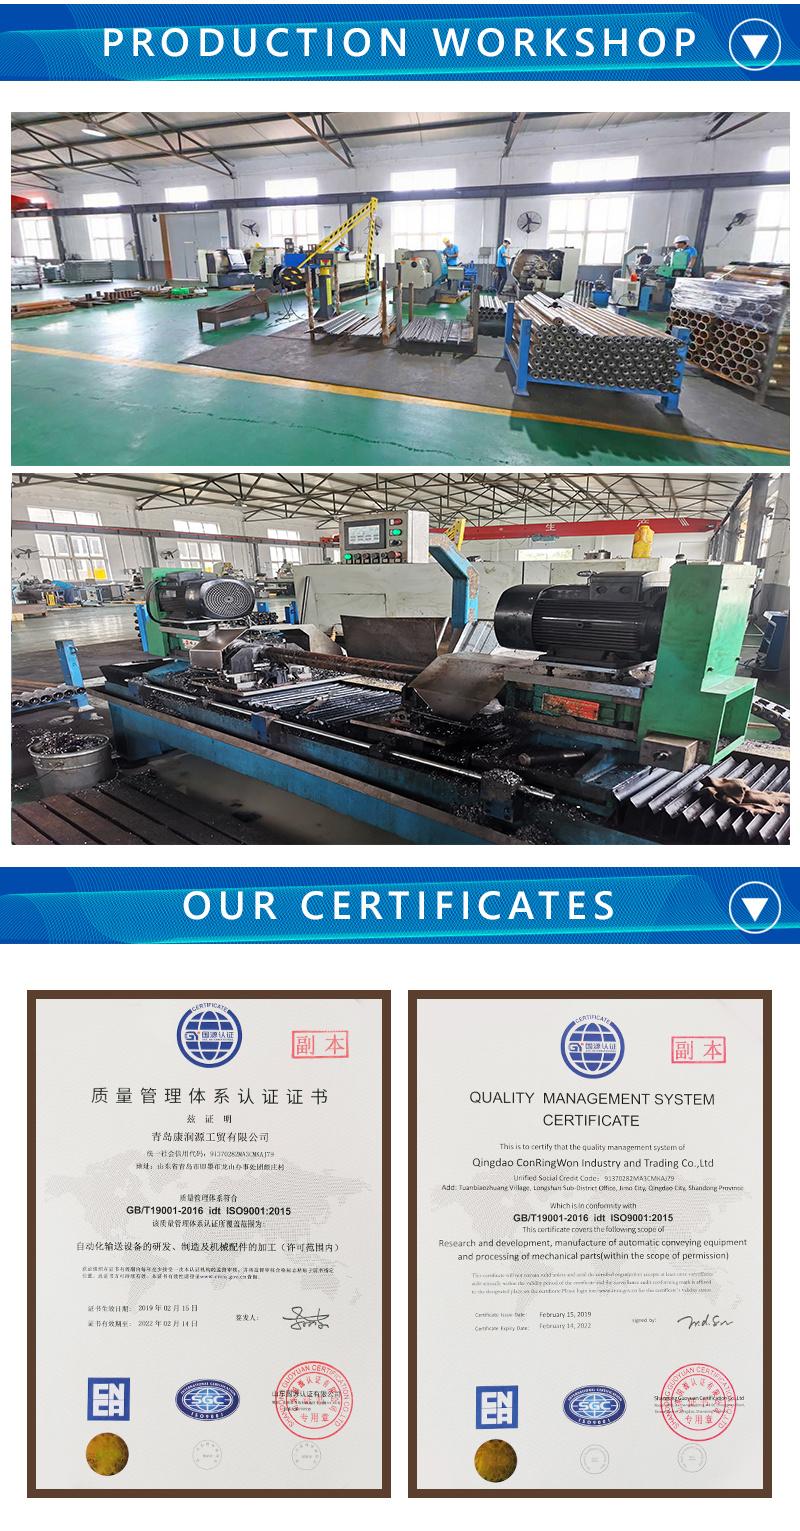 Stainless Steel Extended Roller Conveyor, Expandable Flexible Roller